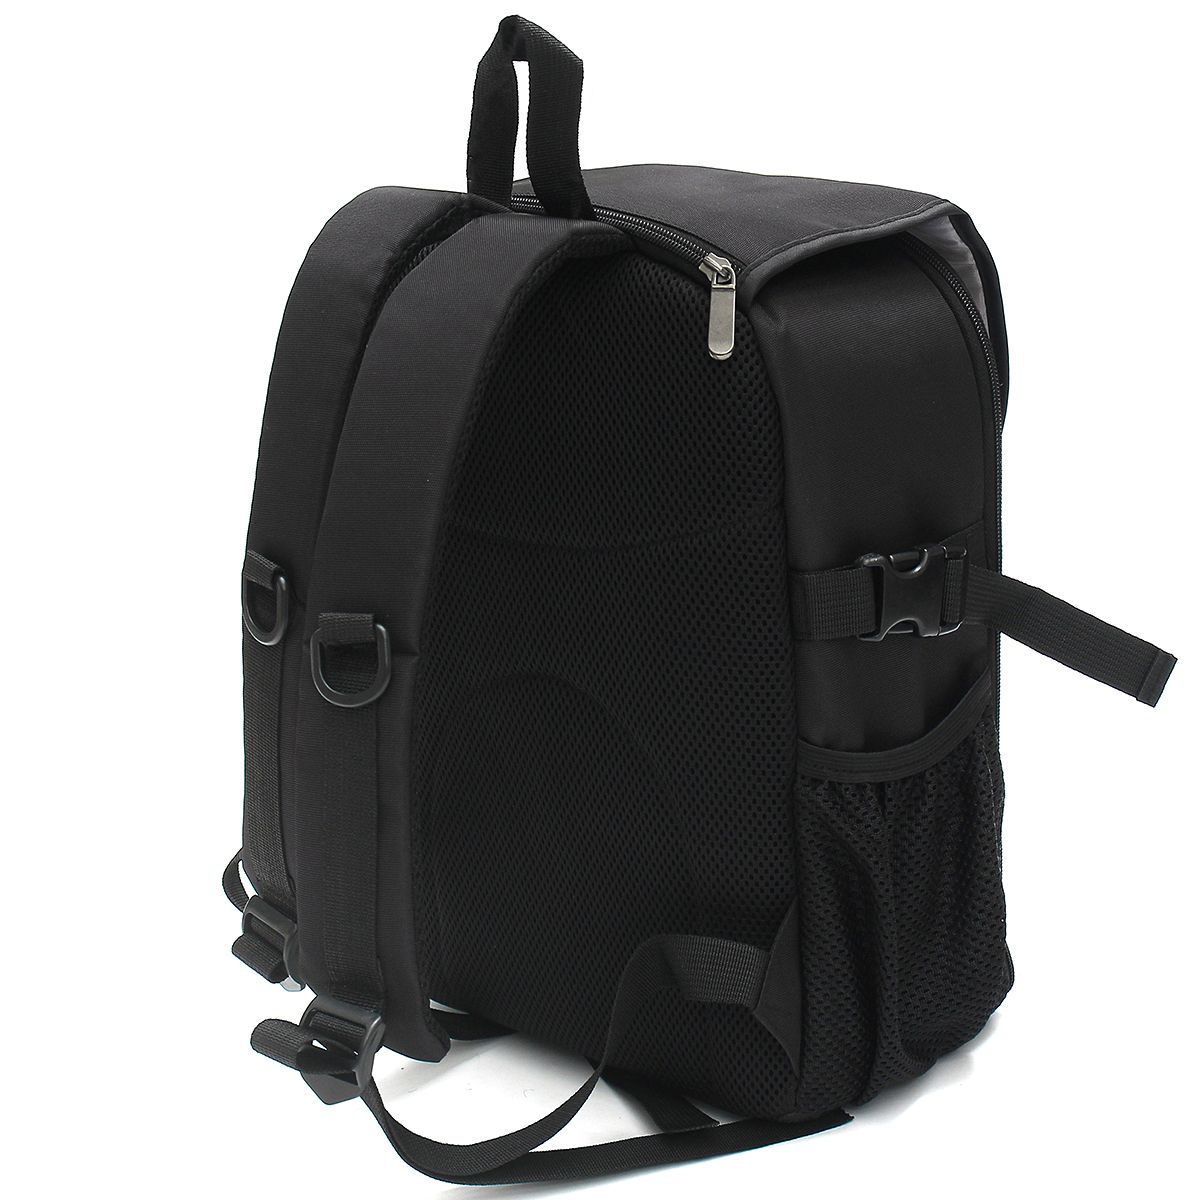 Waterproof-Backpack-Camera-Bag-with-Padded-Bag-for-DSLR-Camera-Lens-Accessories-1339113